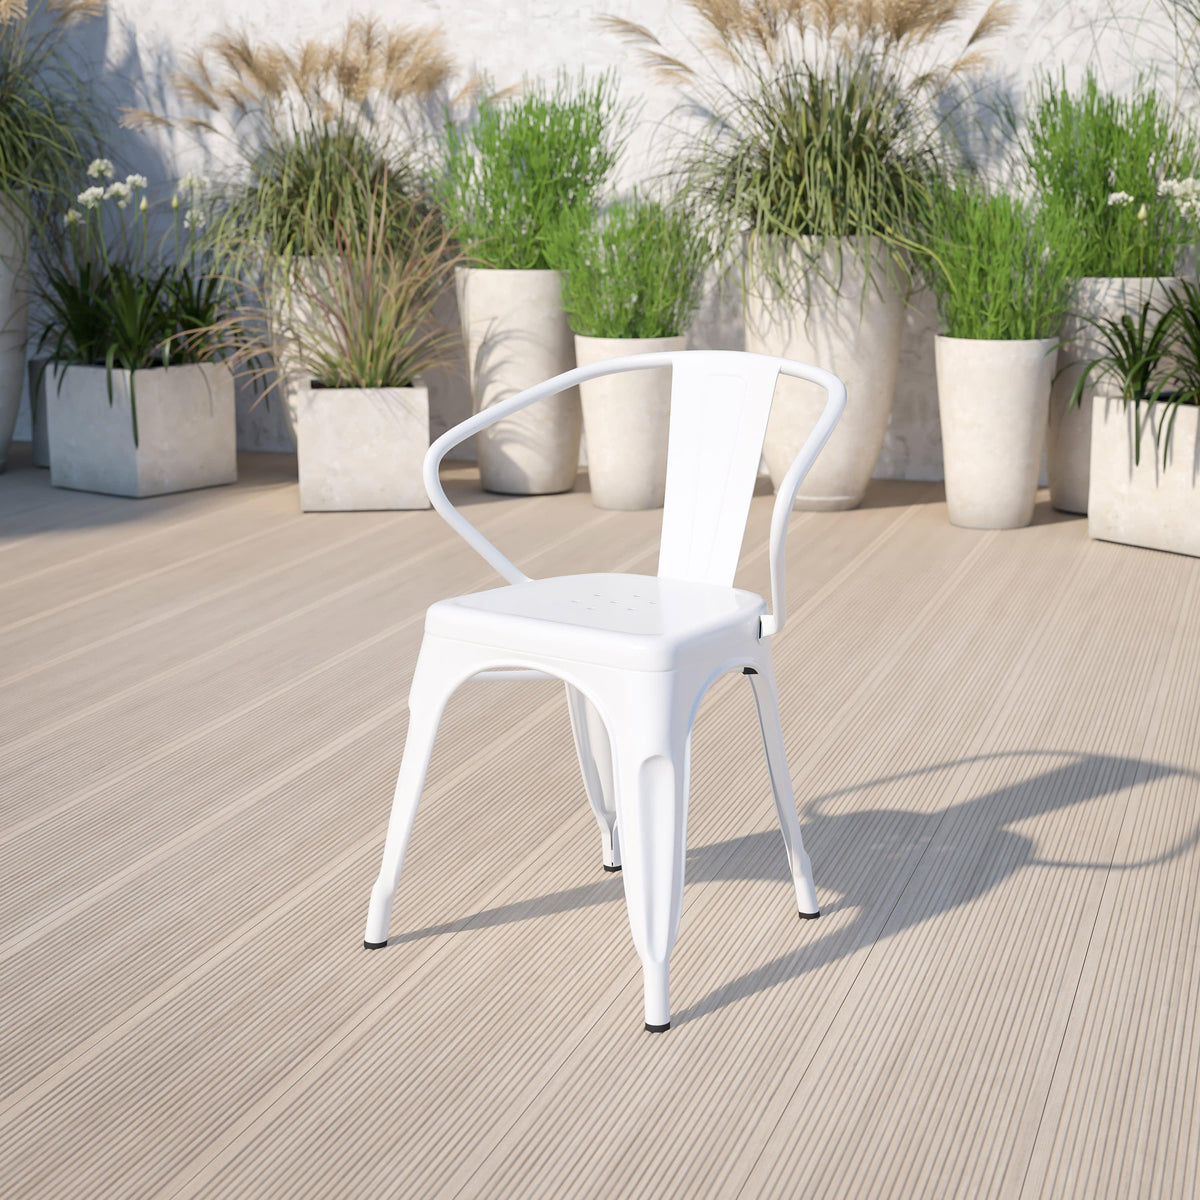 White |#| White Metal Indoor-Outdoor Chair with Arms - Restaurant Furniture